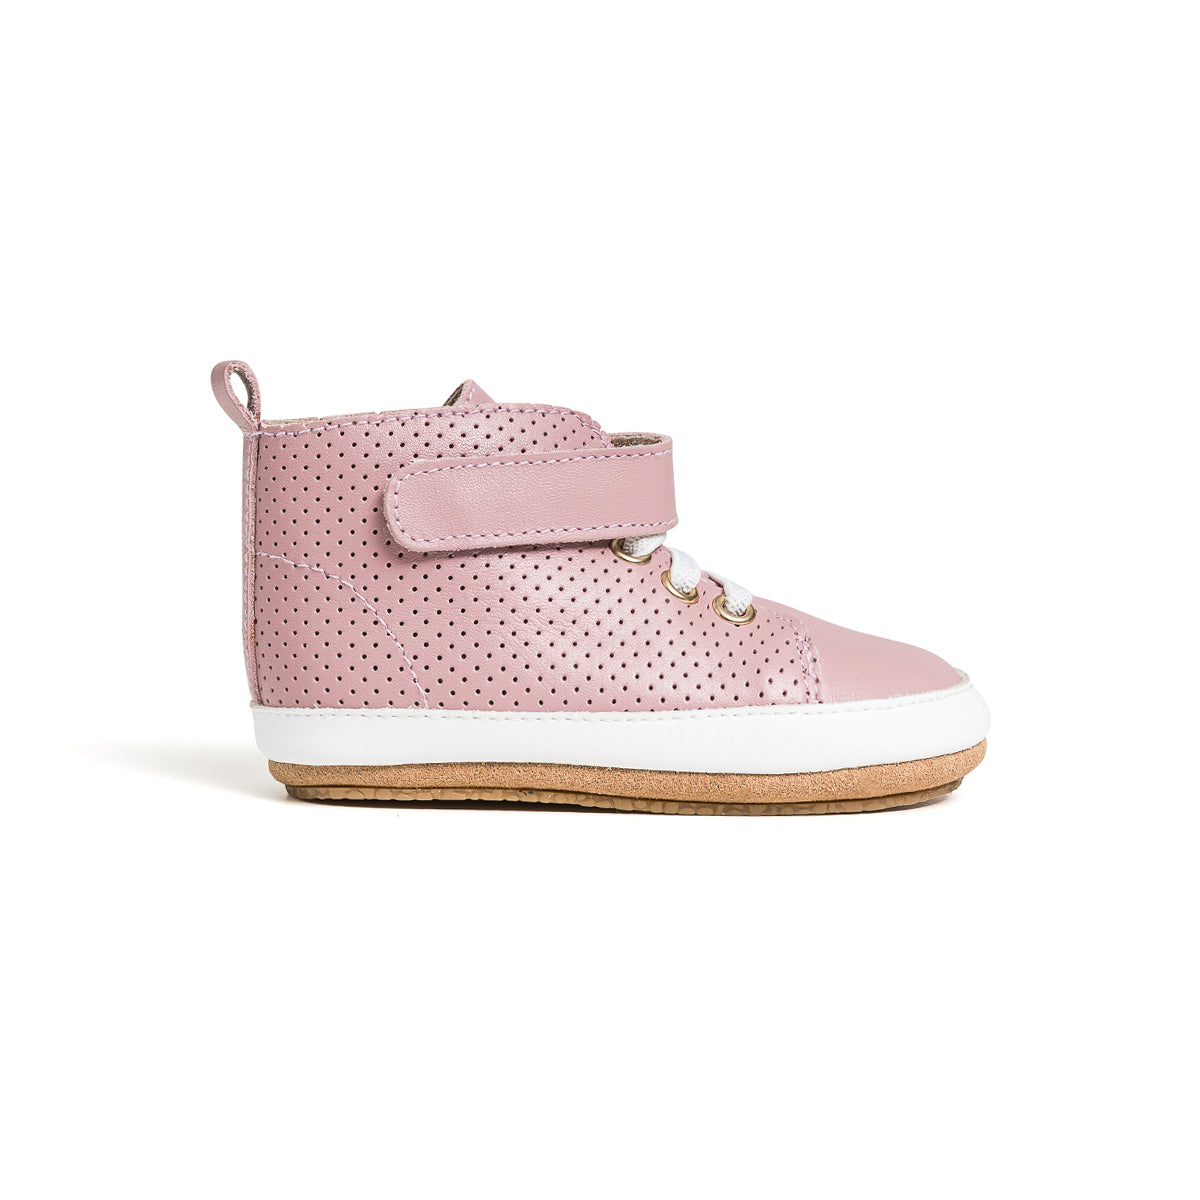 Side view of Pretty Brave Hi Top shoes in rose colour